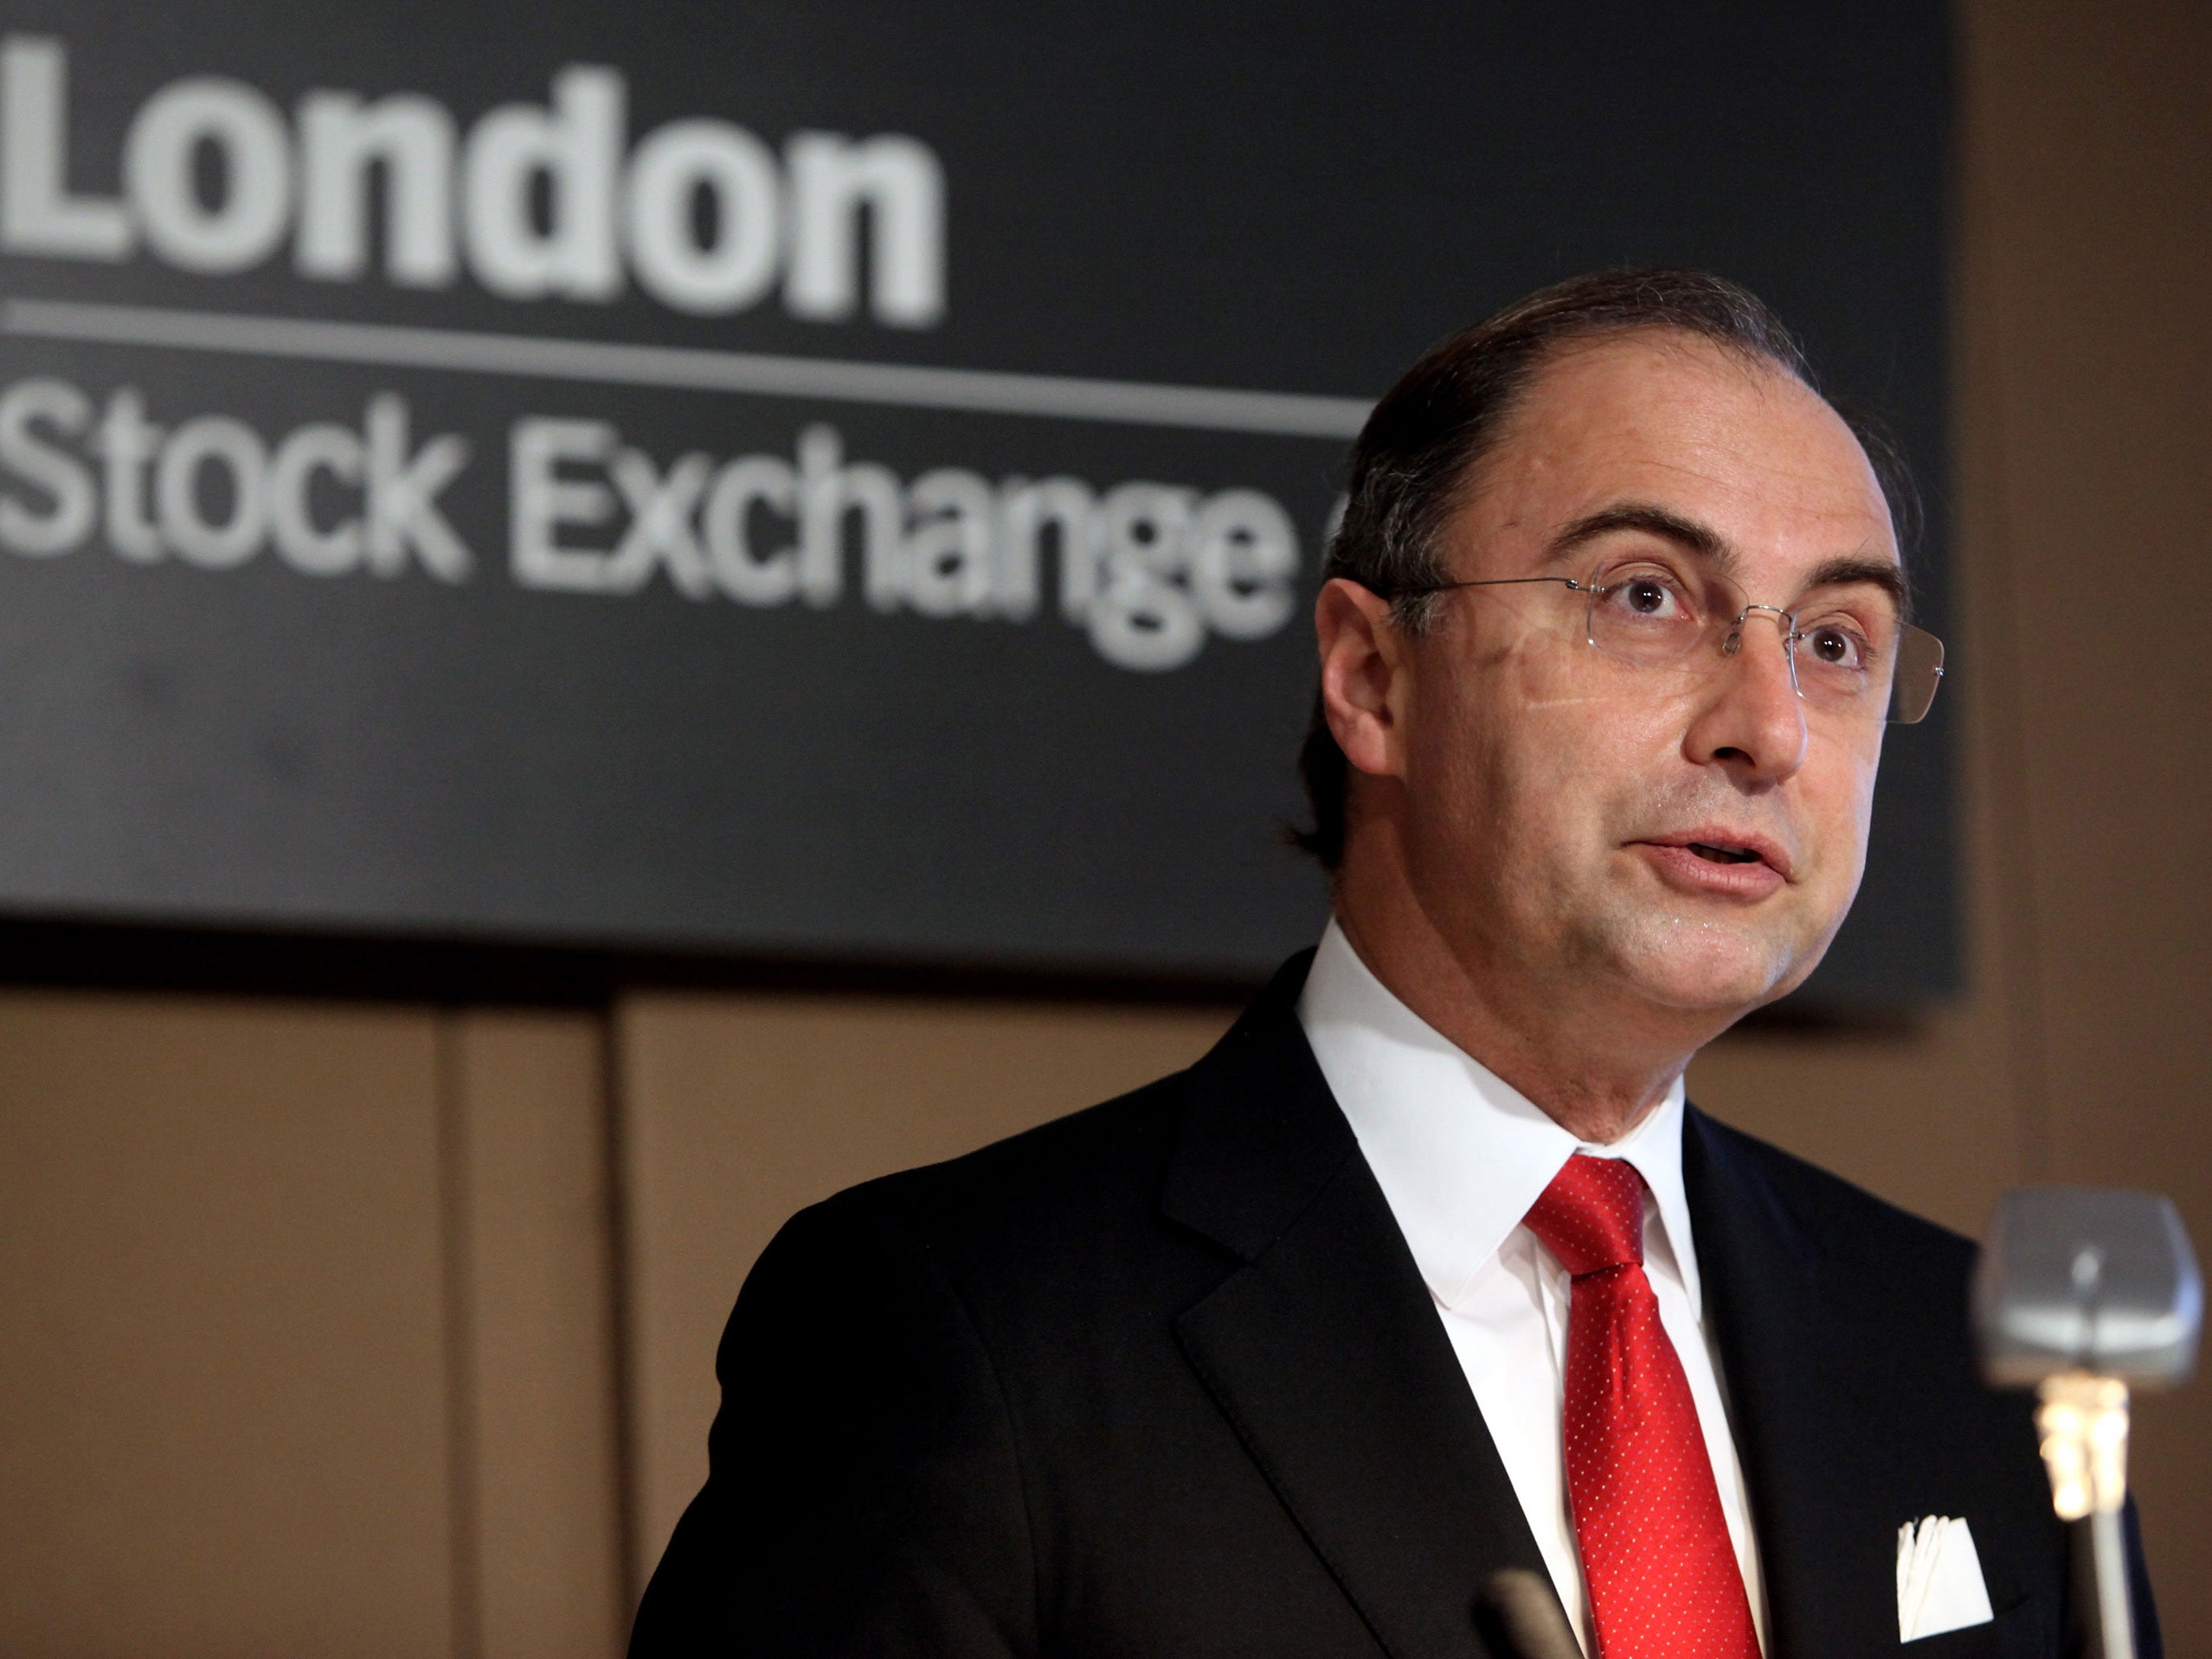 London Stock Exchange chief executive Xavier Rolet wants the retail part of future flotations to be distributed through the network of stockbrokers that deal with the public